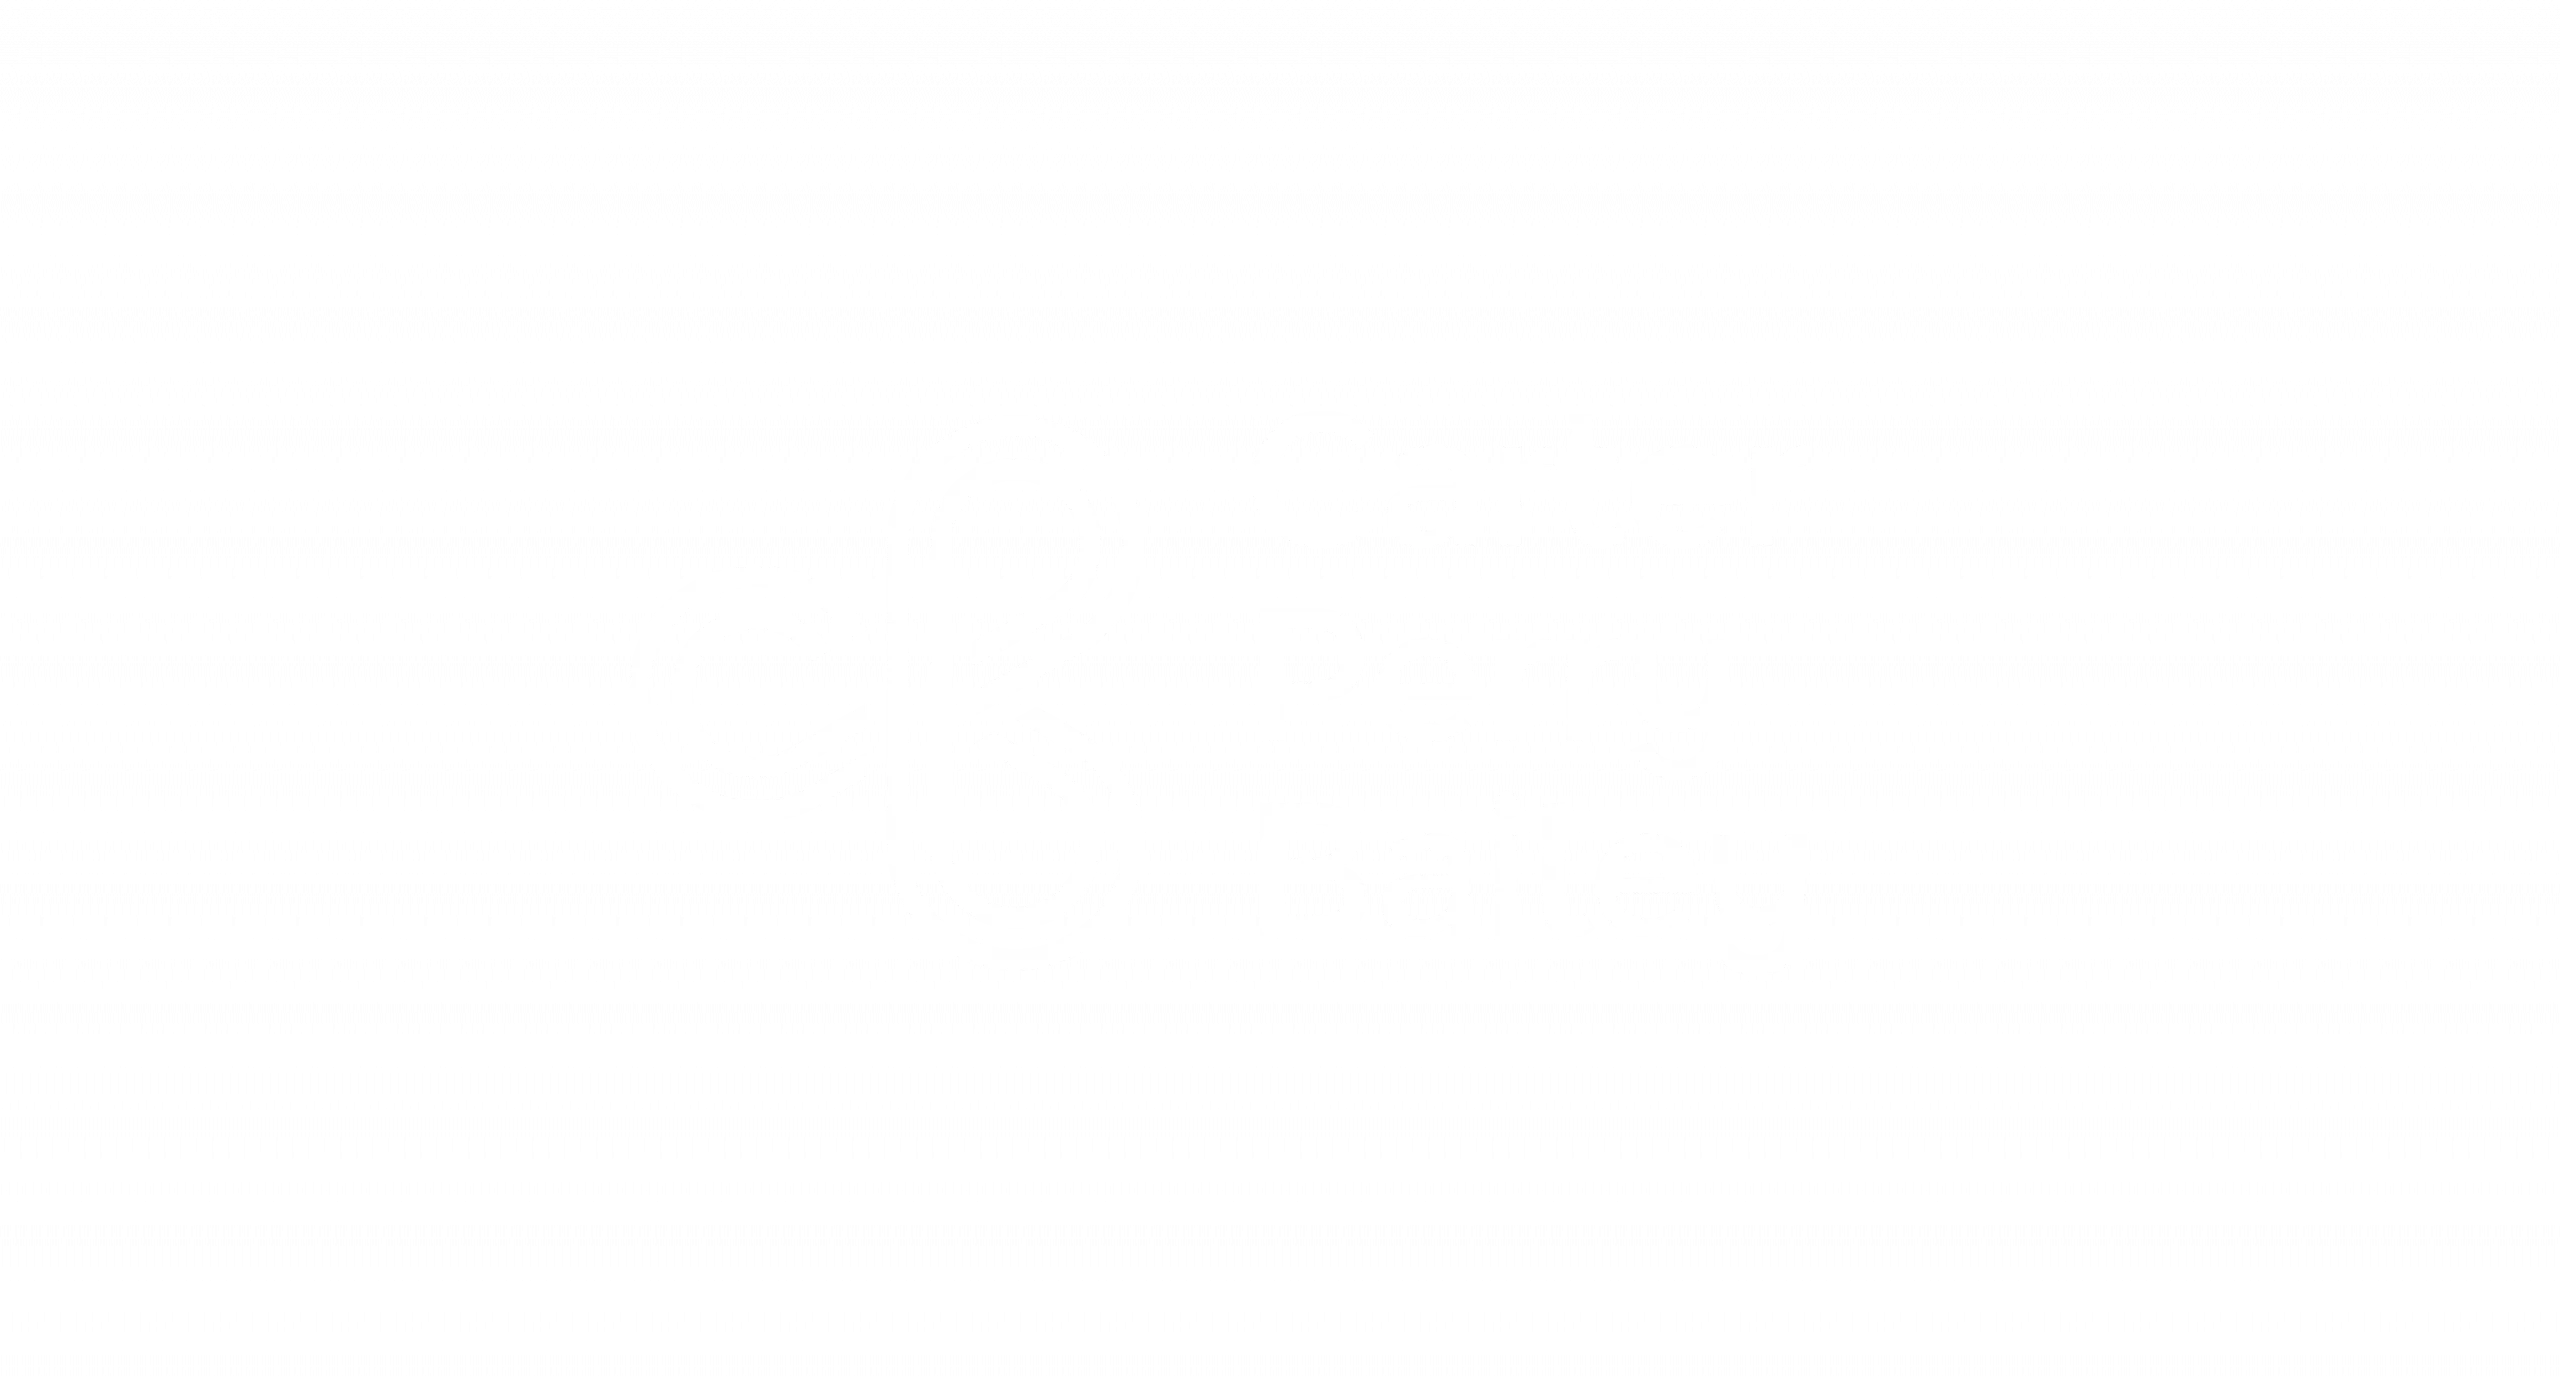 Carter Perry Bailey Branding by Peek Creative Limited